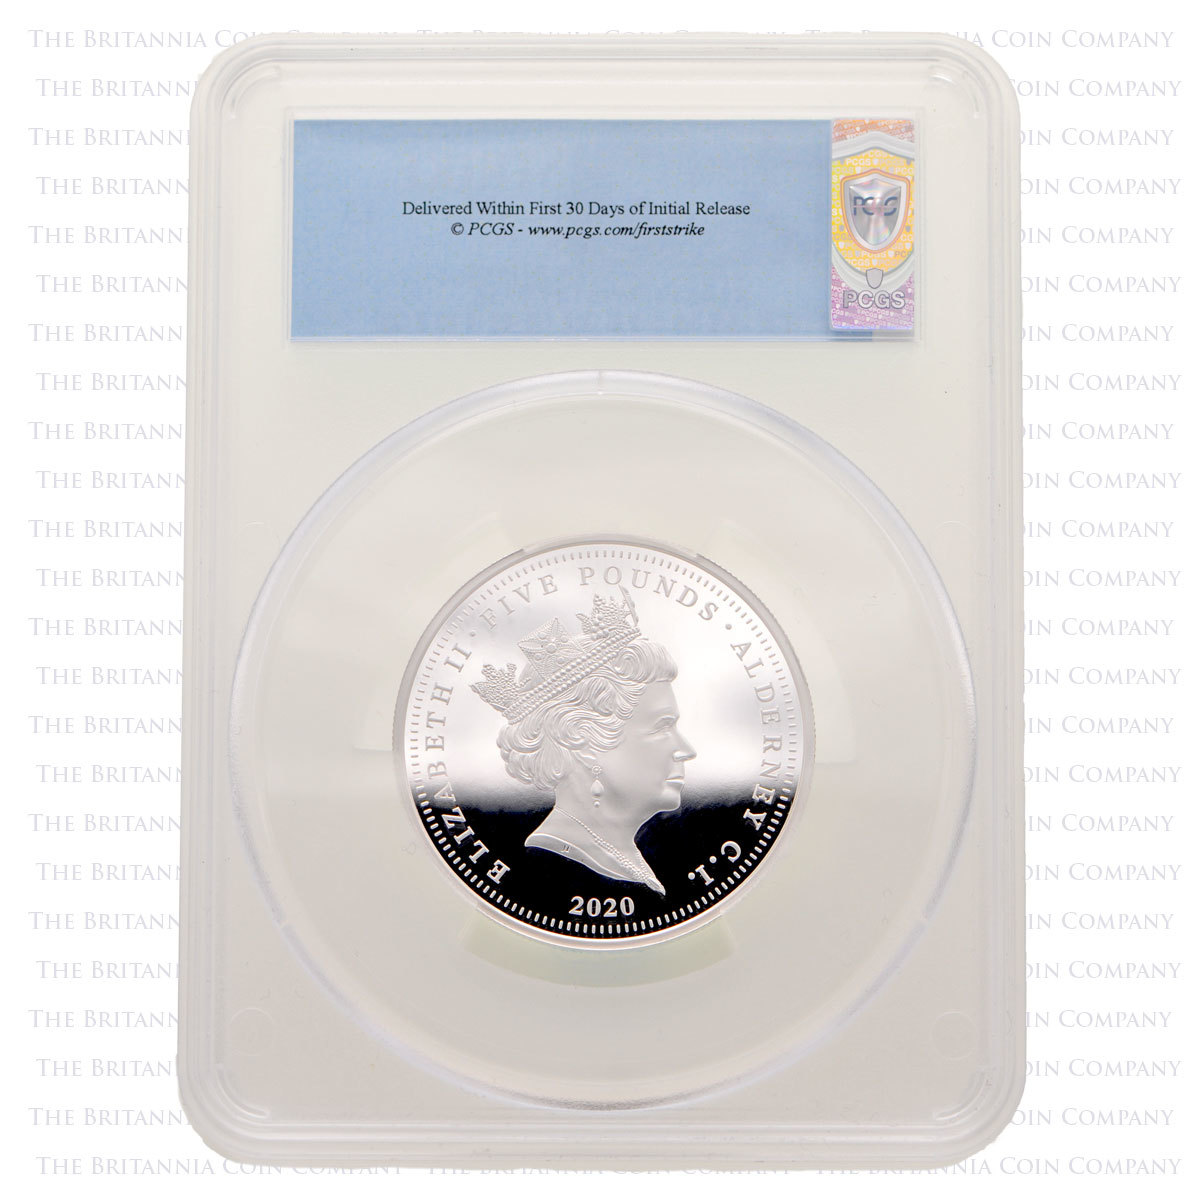 Obverse of the Alderney Three Graces Silver Proof